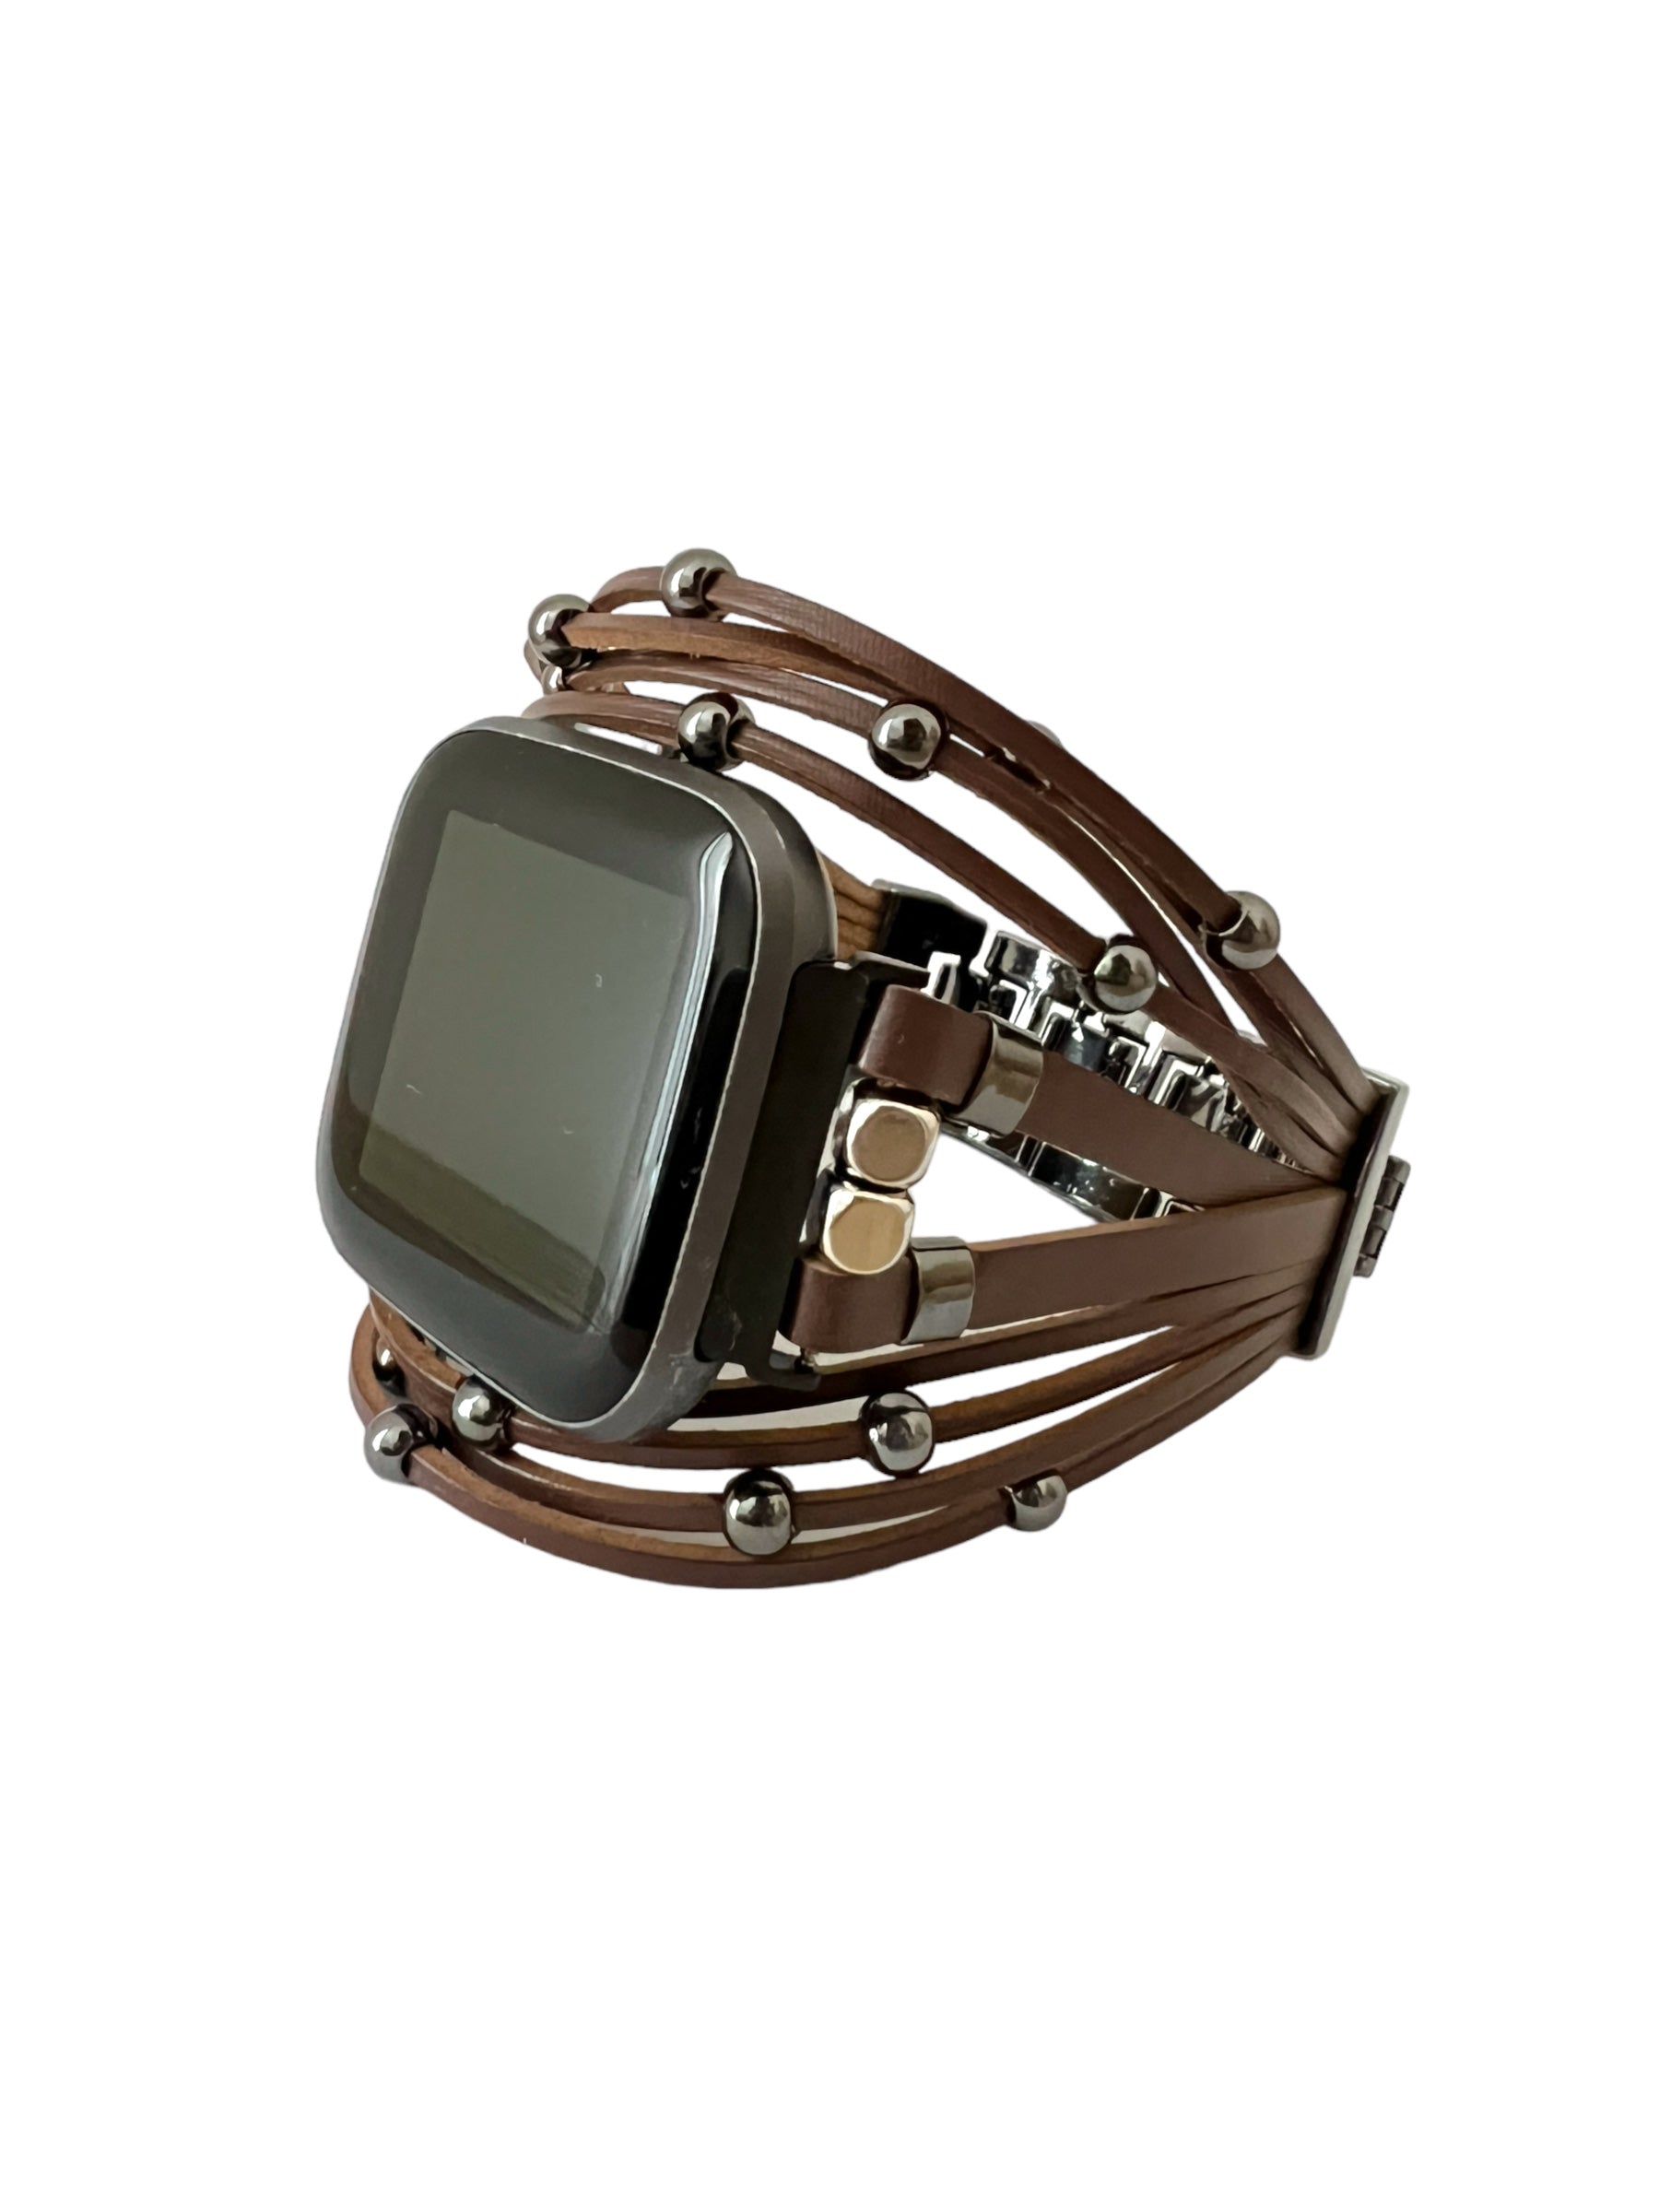 LABEAD Layered Watch Band for Fitbit Versa and Sense Watch